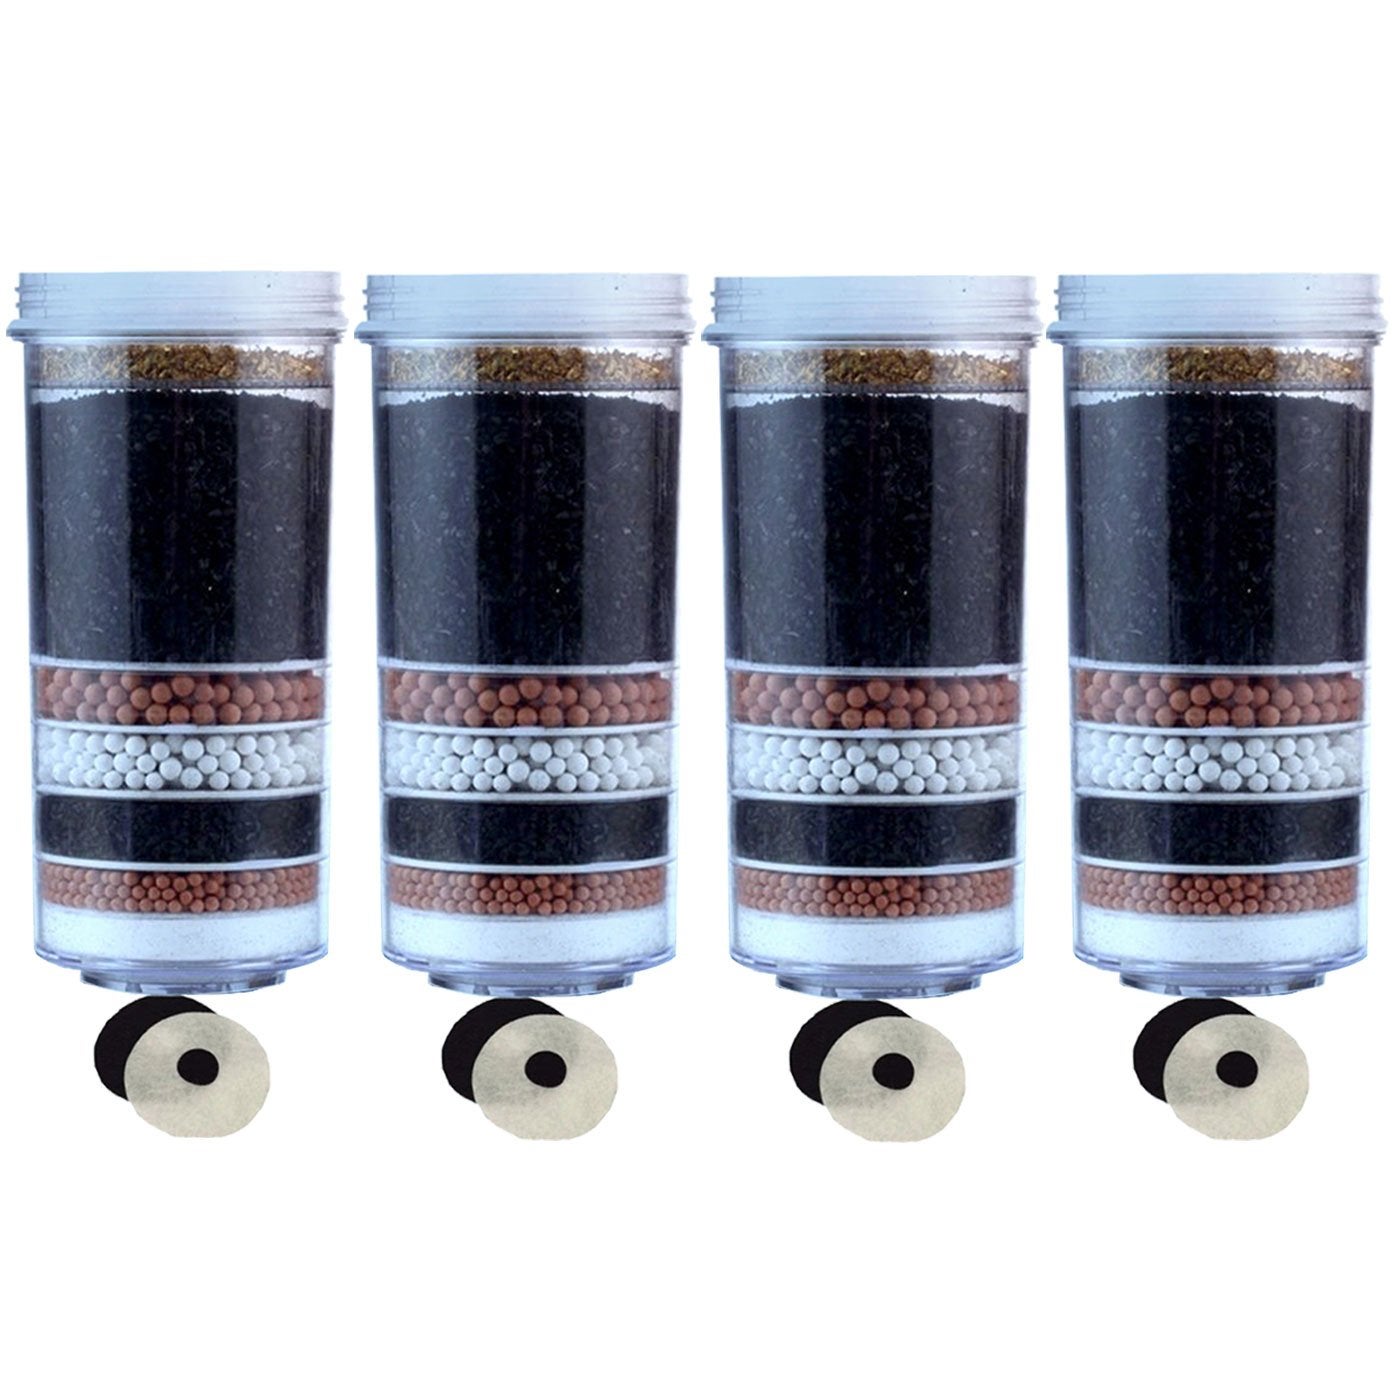 Aimex Water Filter 8 Stage Water Purifier cartridge 4 Pack